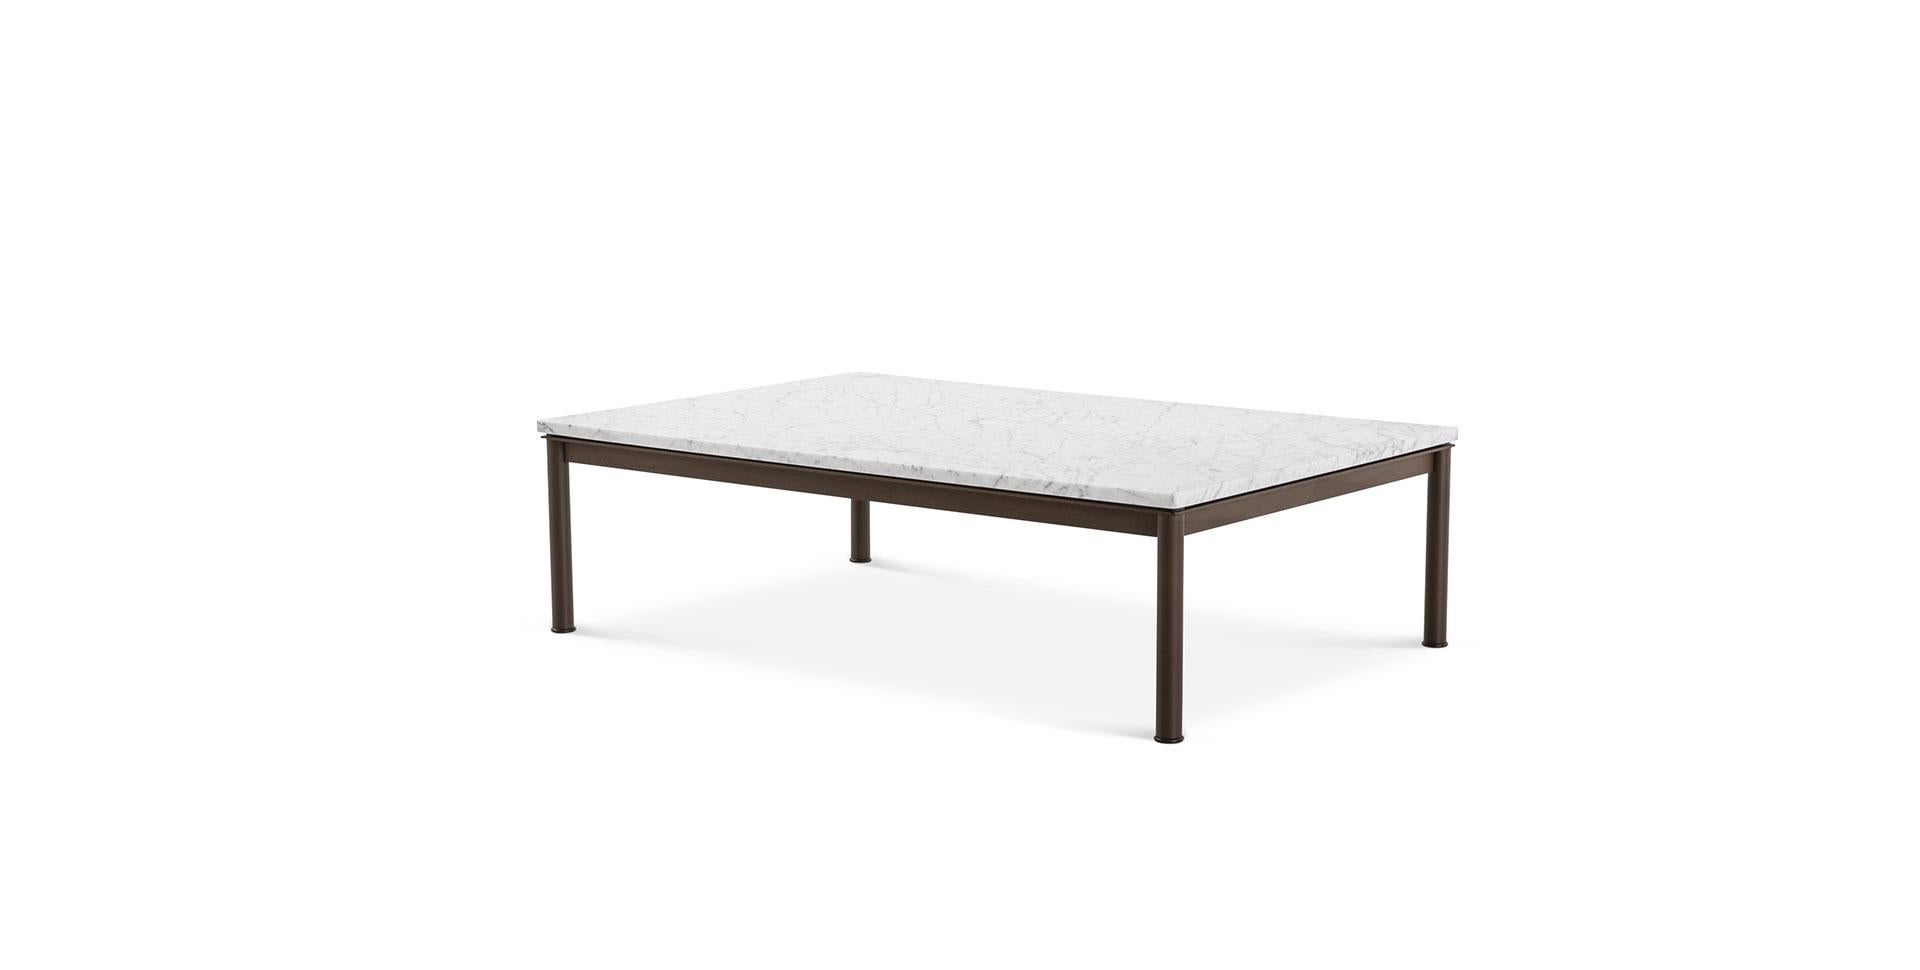 Le Corbusier, Pierre Jeanneret, Charlotte Perriand Lc10 Ivory Table by Cassina In New Condition For Sale In Barcelona, Barcelona